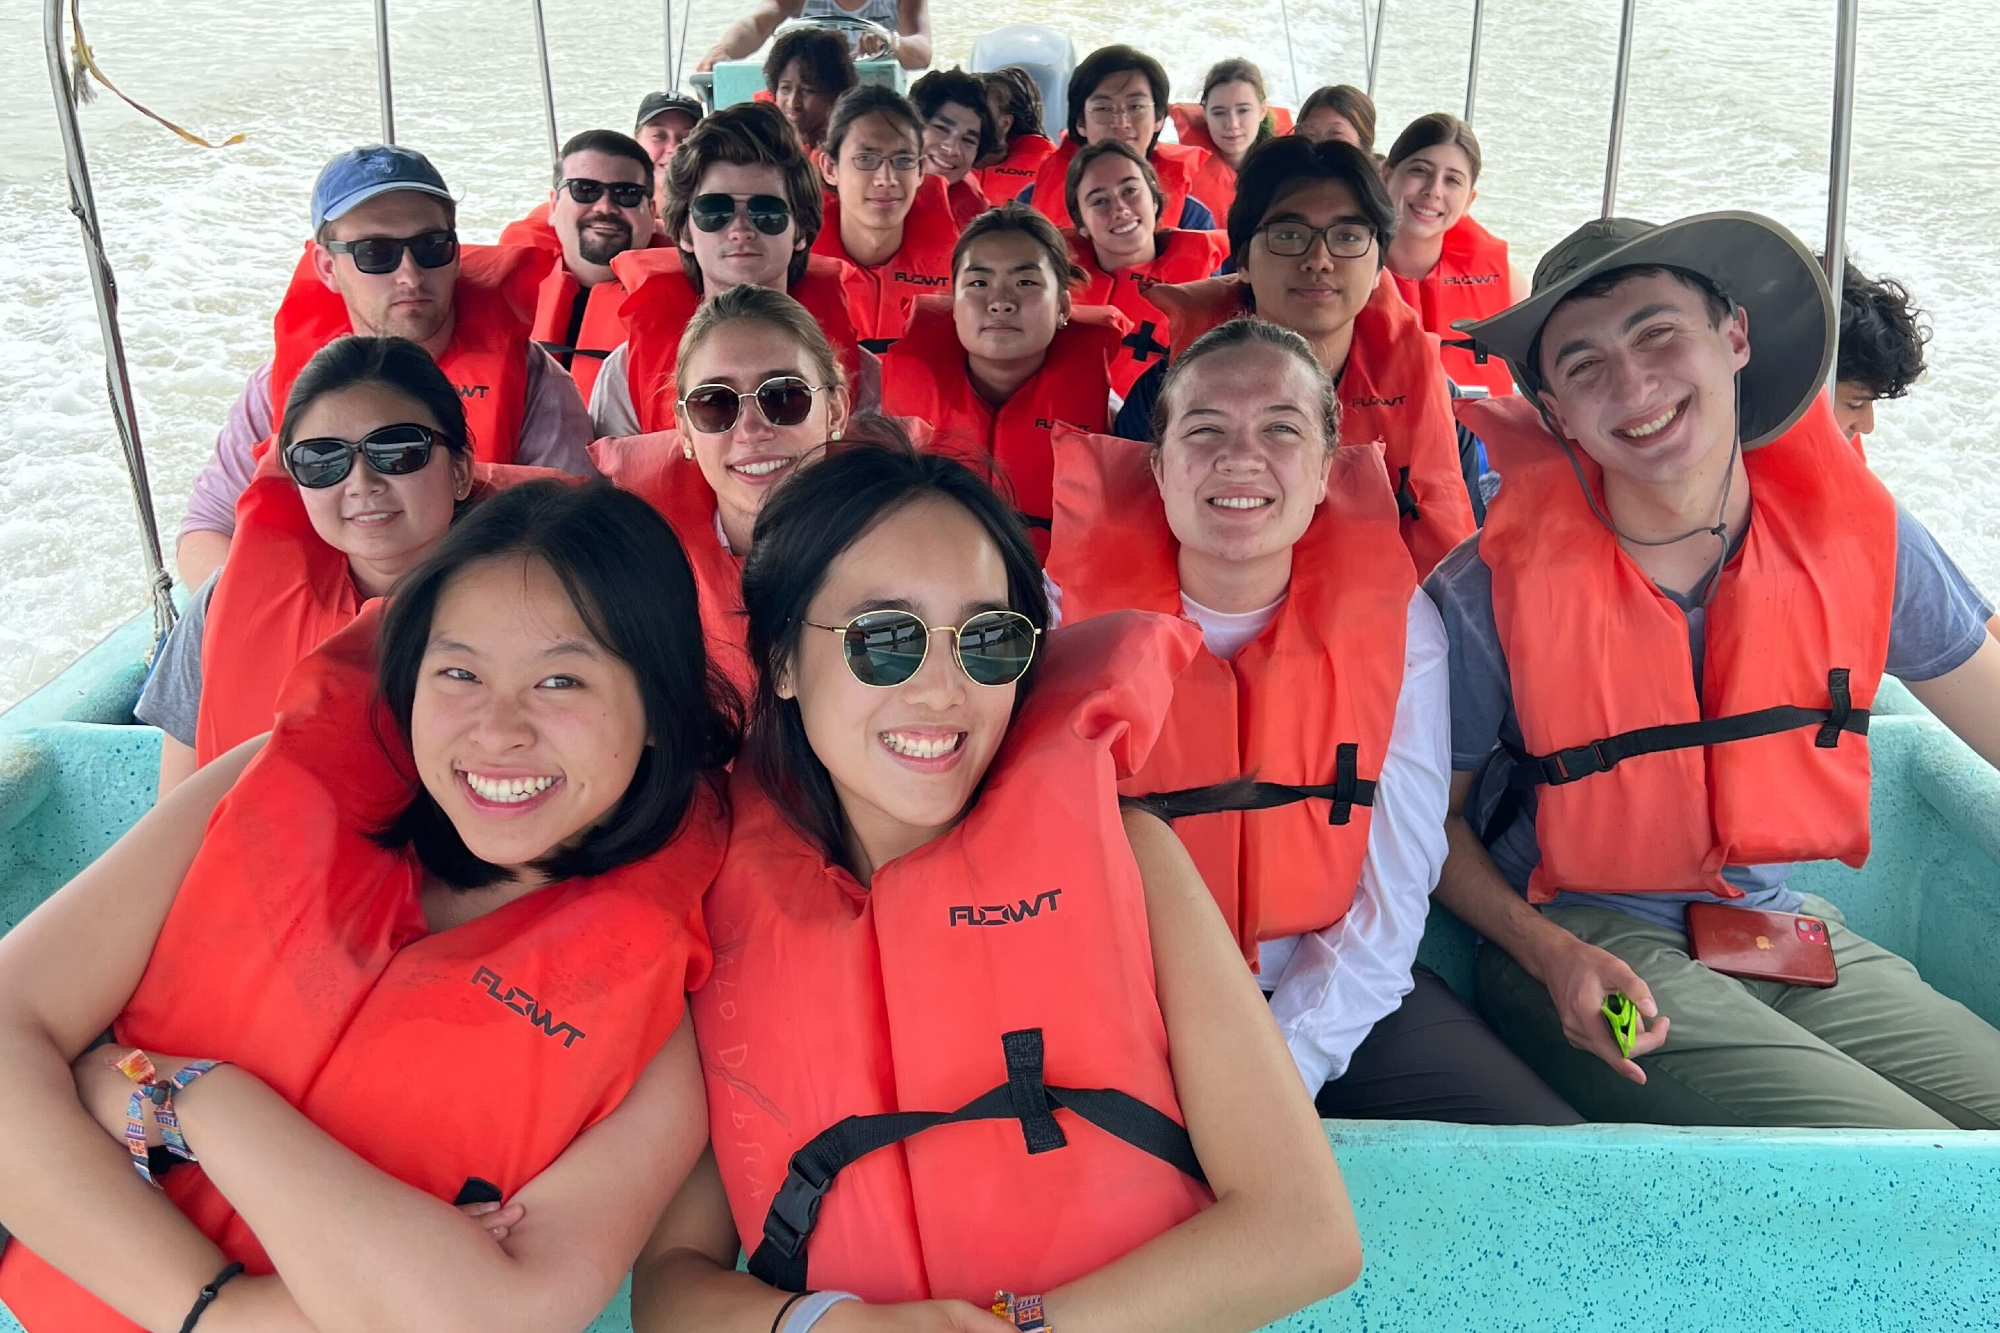 Members of Penn’s Glee Club in life jackets on a boat in Panama.